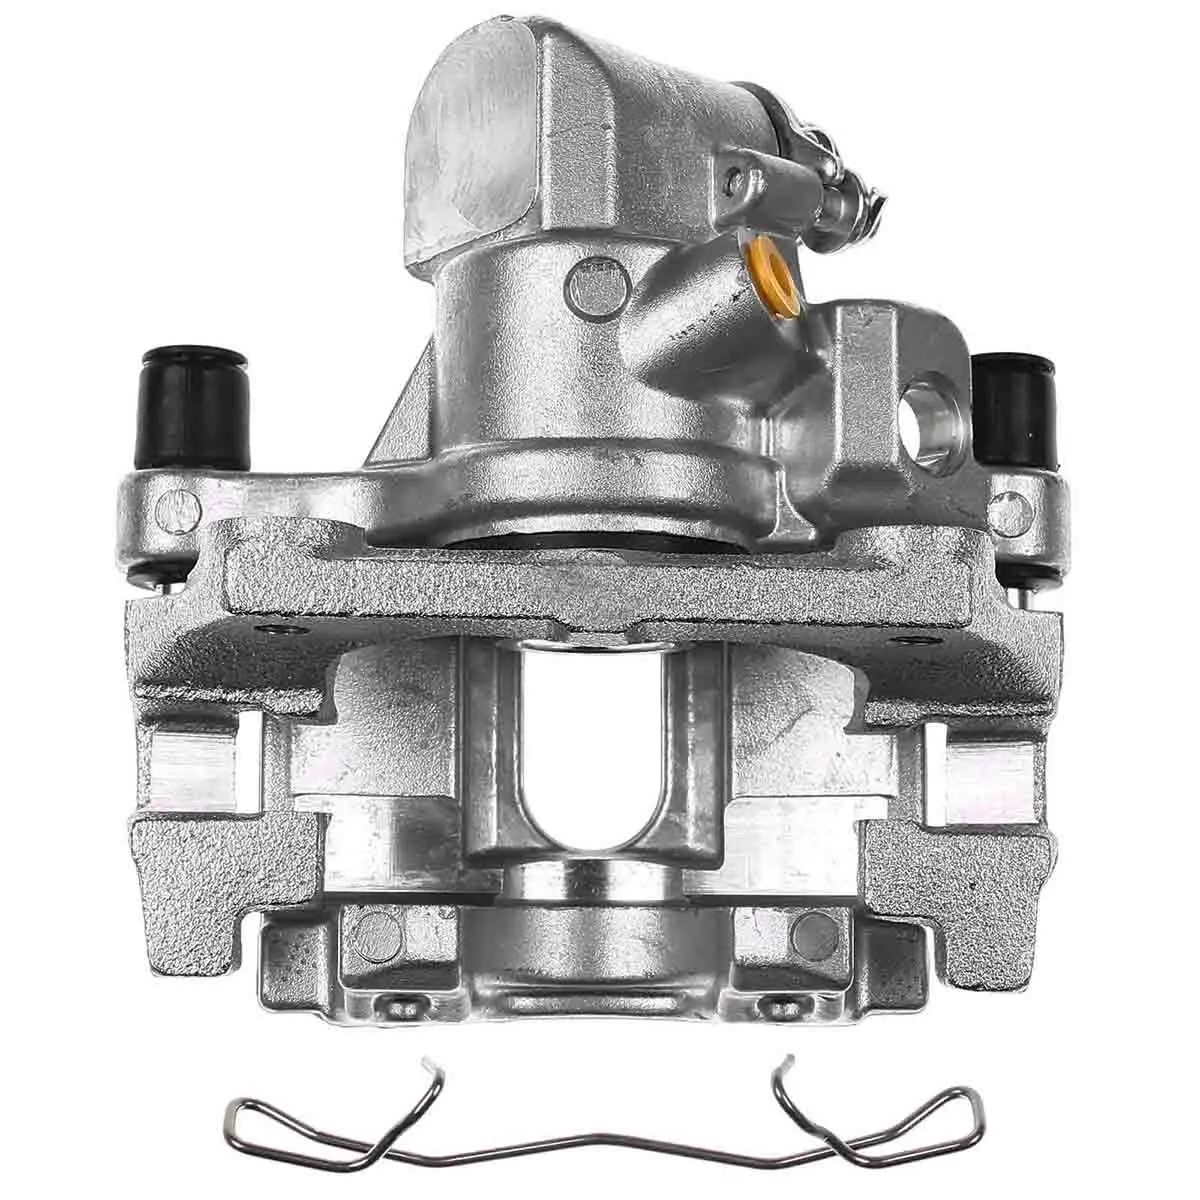 

In-stock CN US CA Brake Caliper with Bracket for Ford Escape 13-16 Transit Connect Mazda 3 Rear Left 19-B6284A